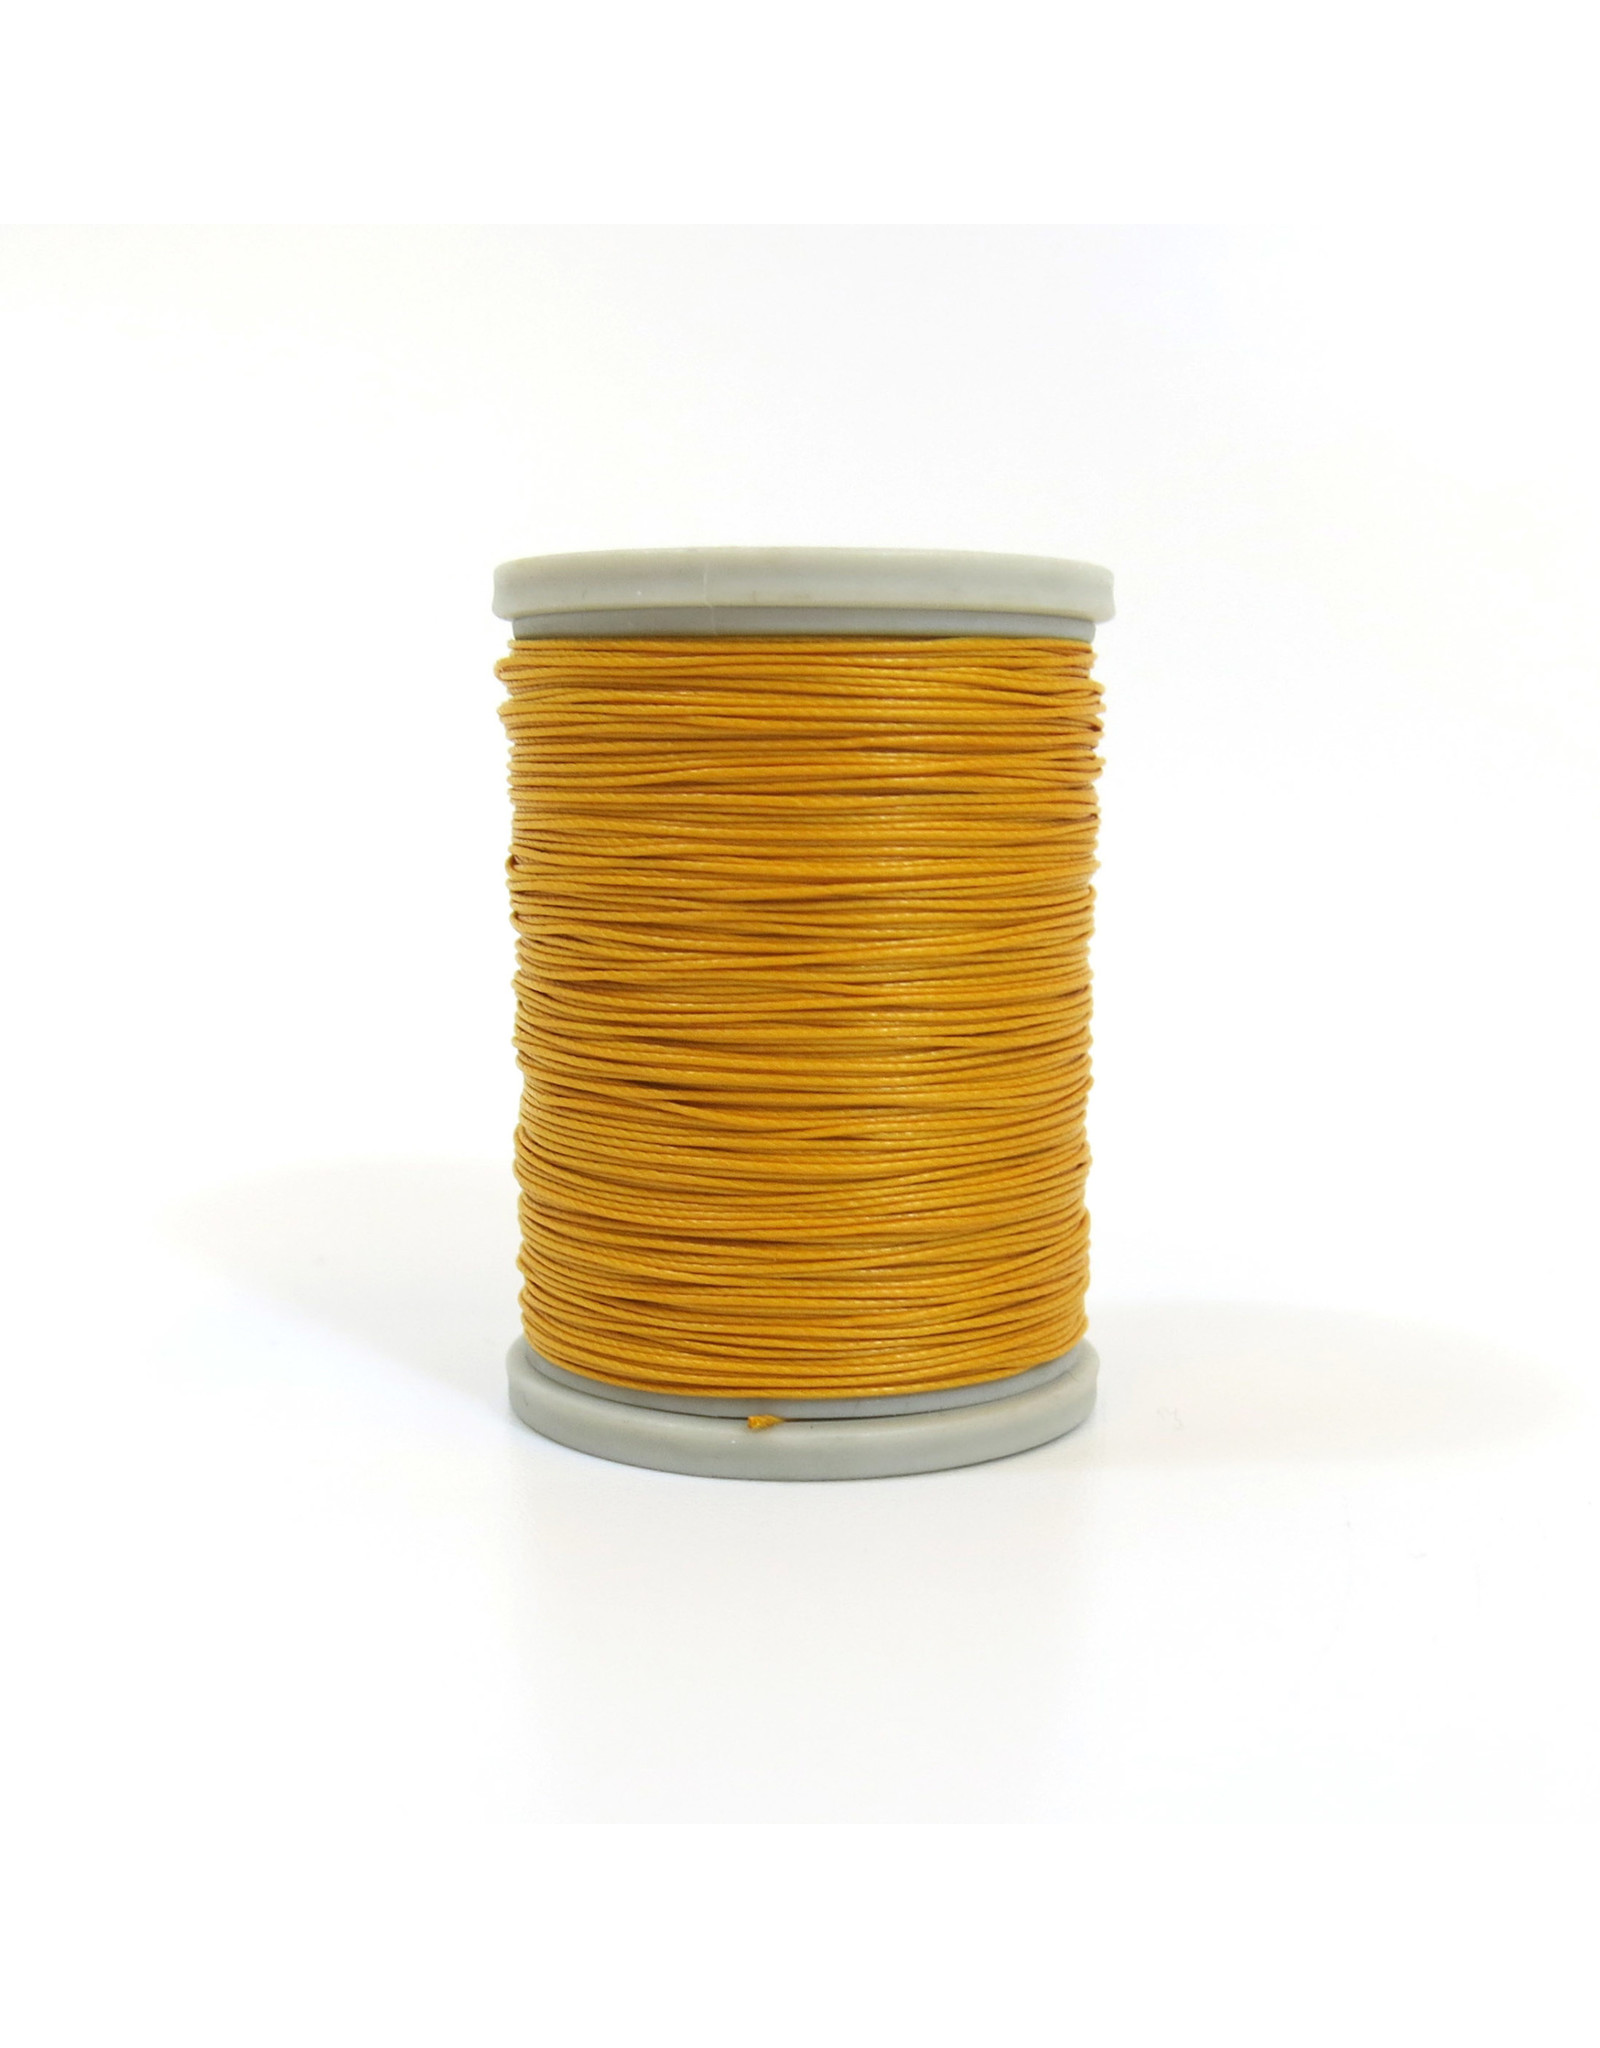 Hand sewing thread Yellow